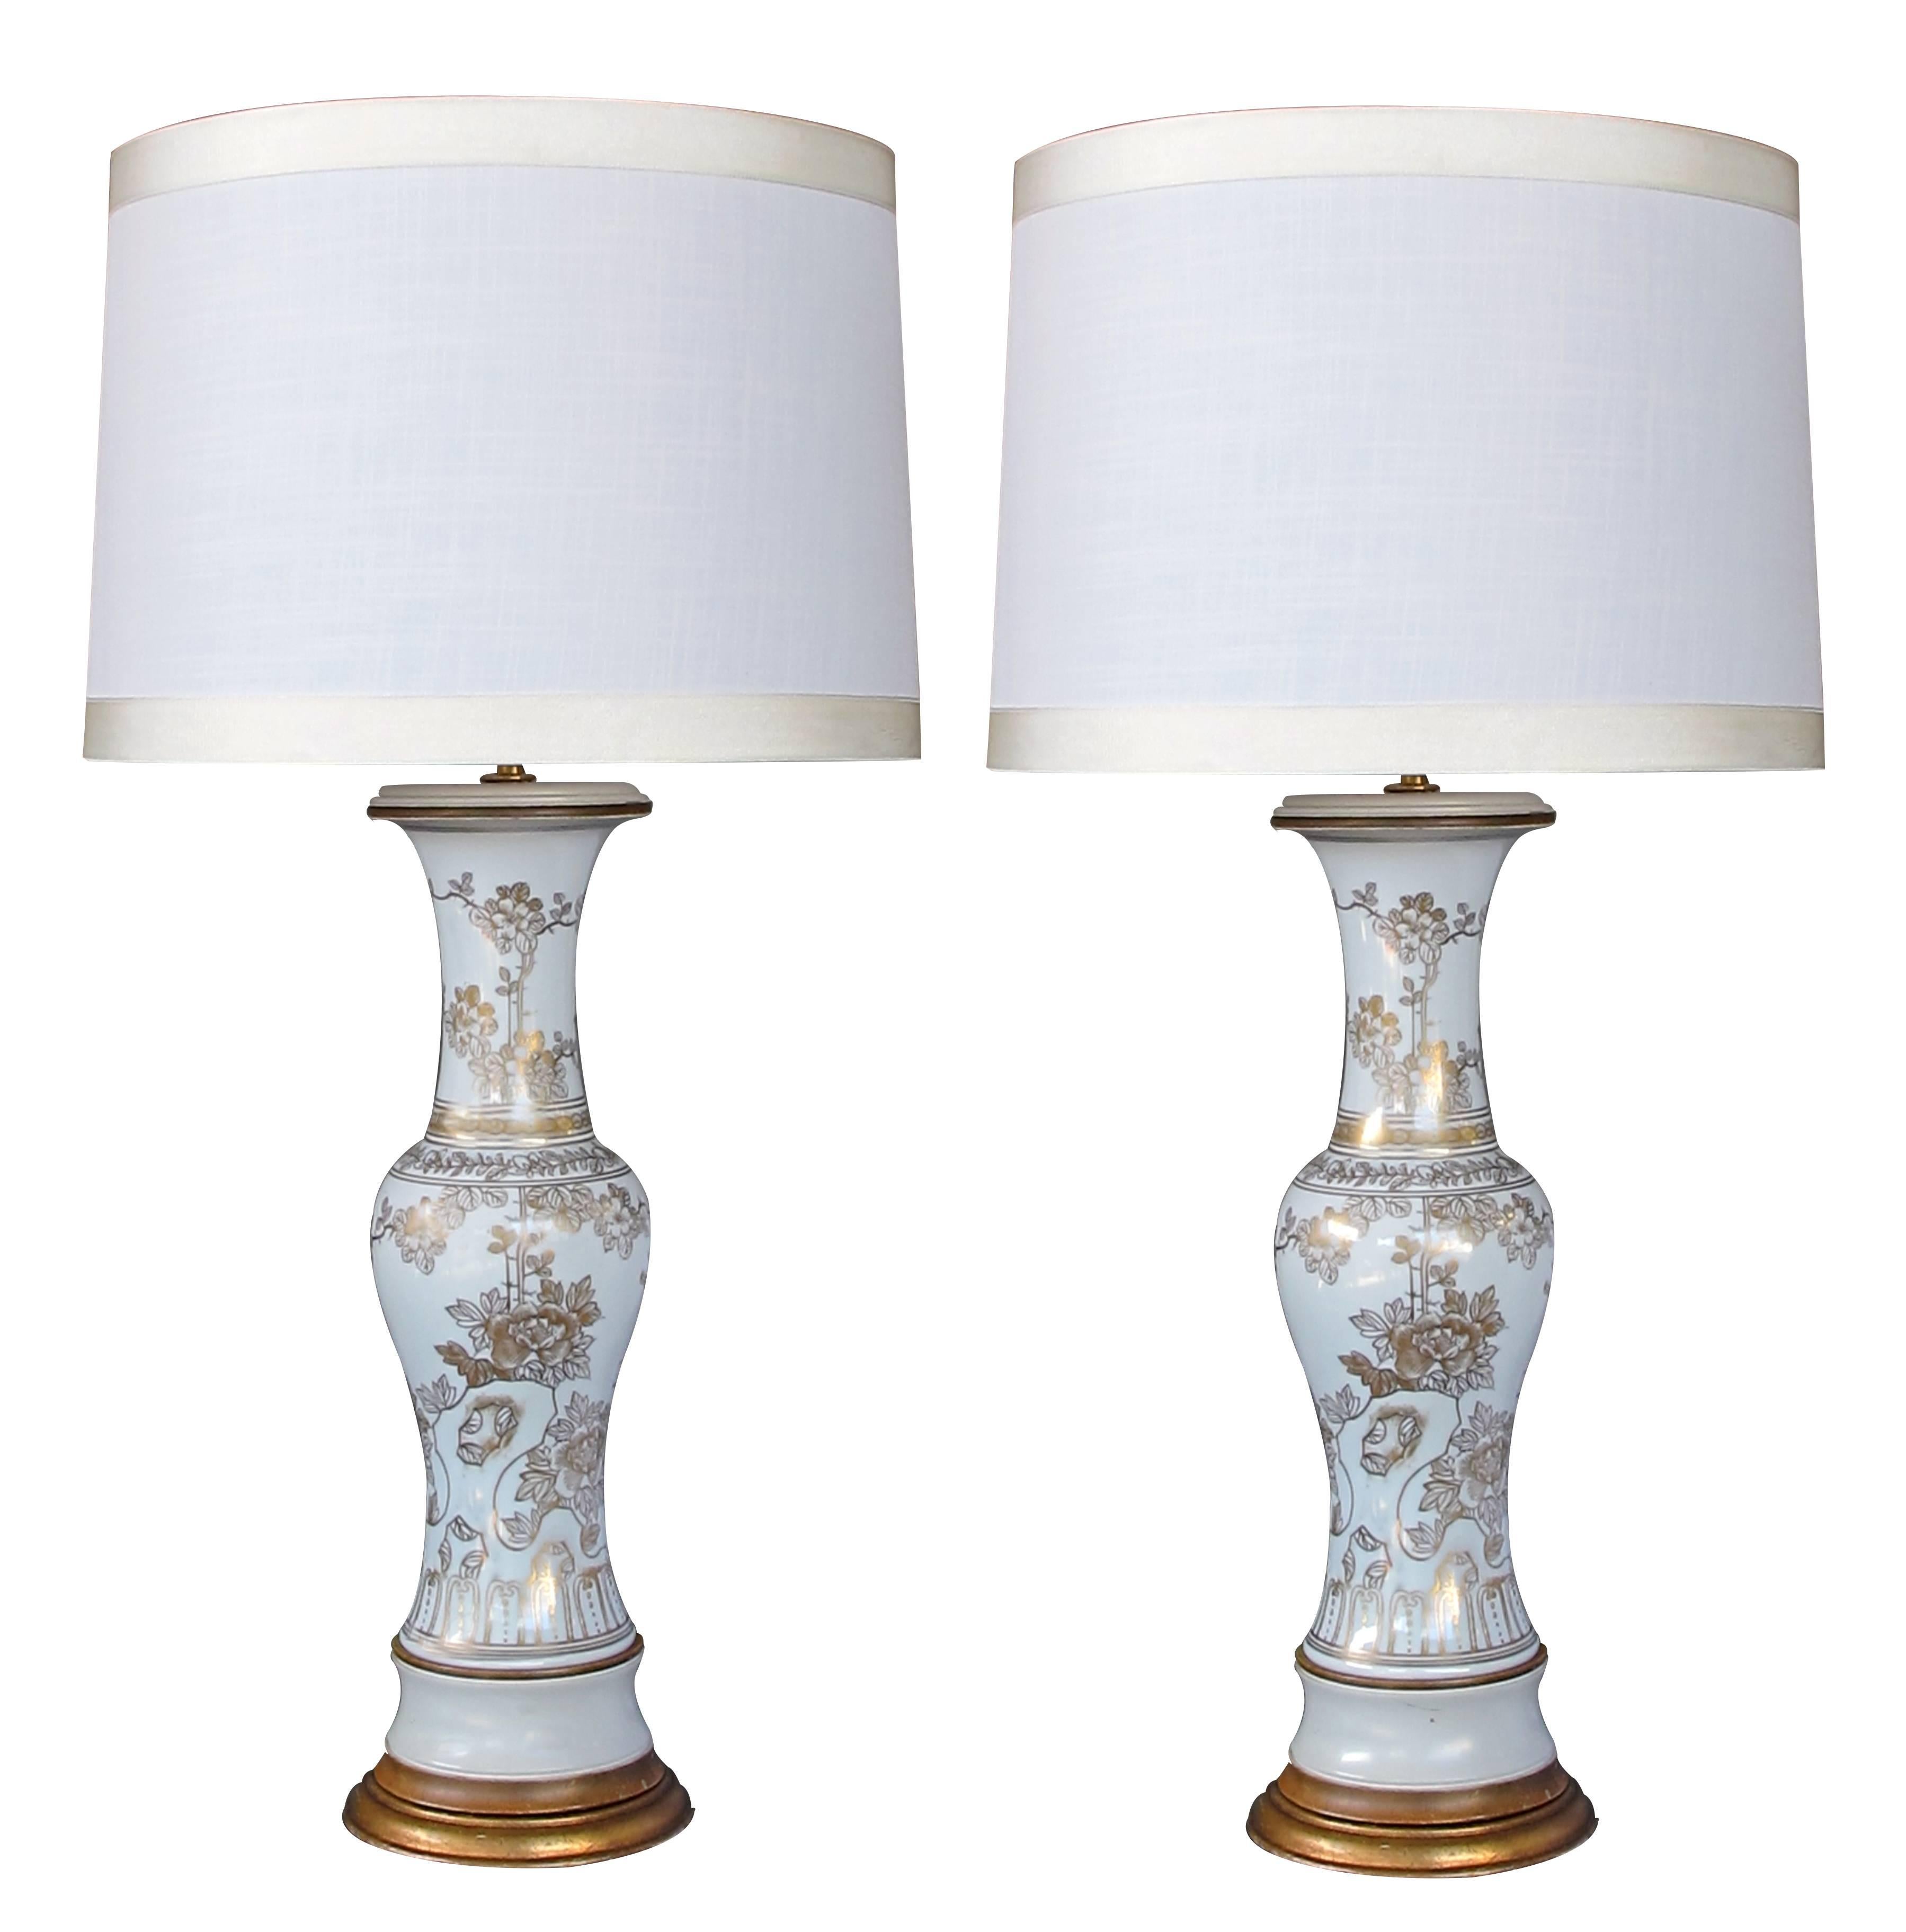 Elegant Pair of 19th Century Chinese Baluster-Form Porcelain Vases Now Lamps